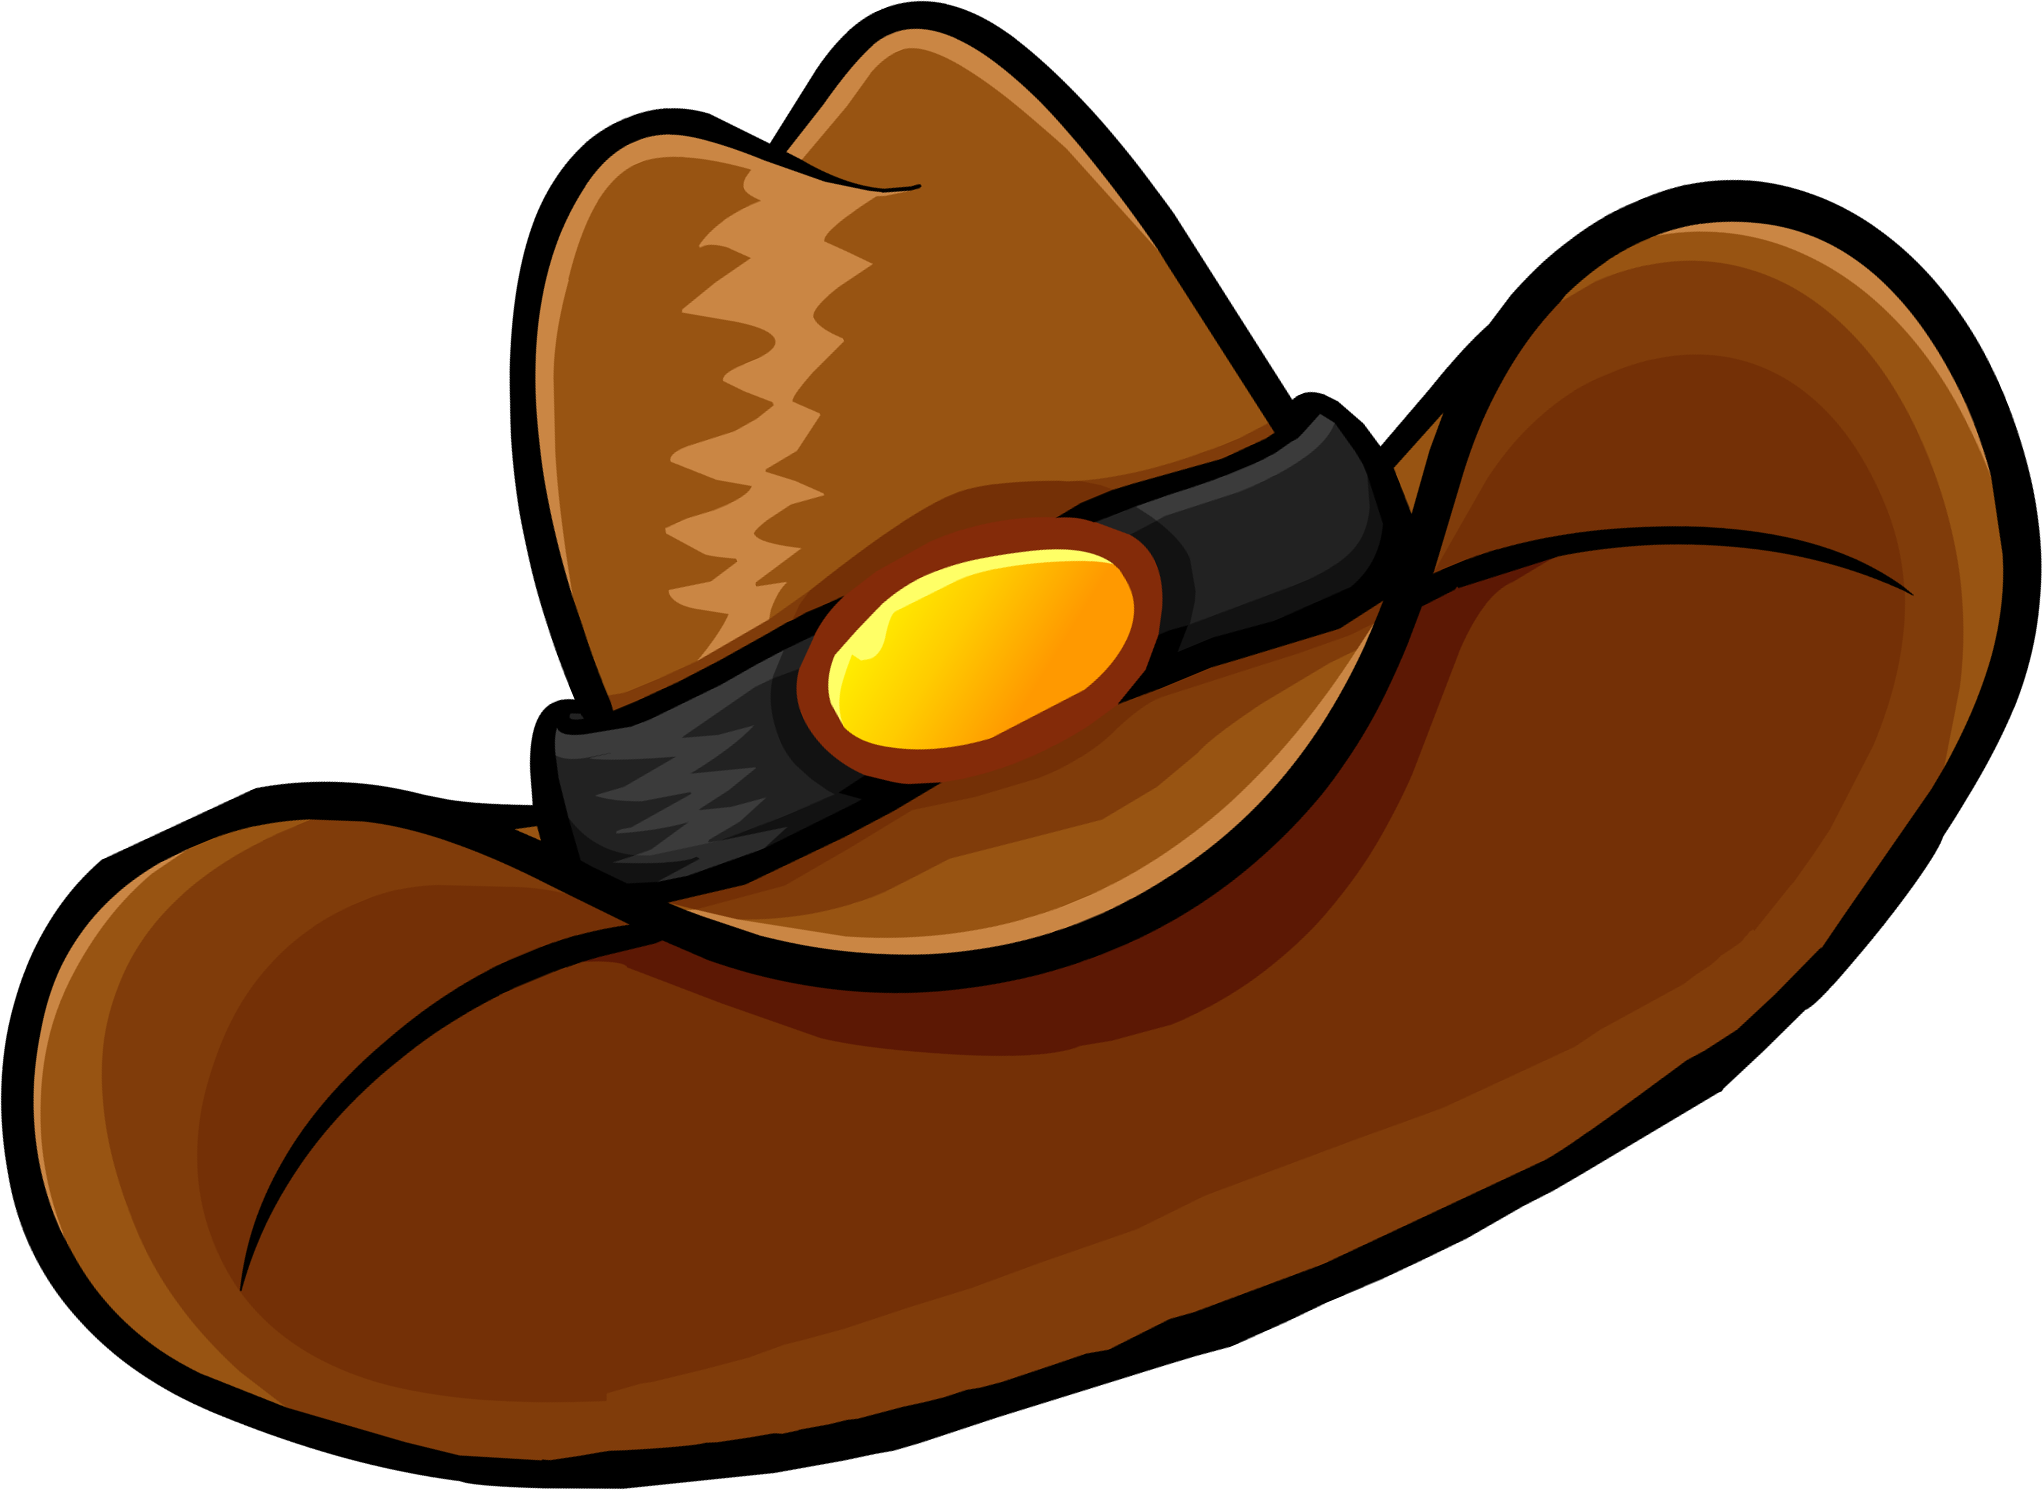 Cowboy Hat - ClipArt Best. Related posts: